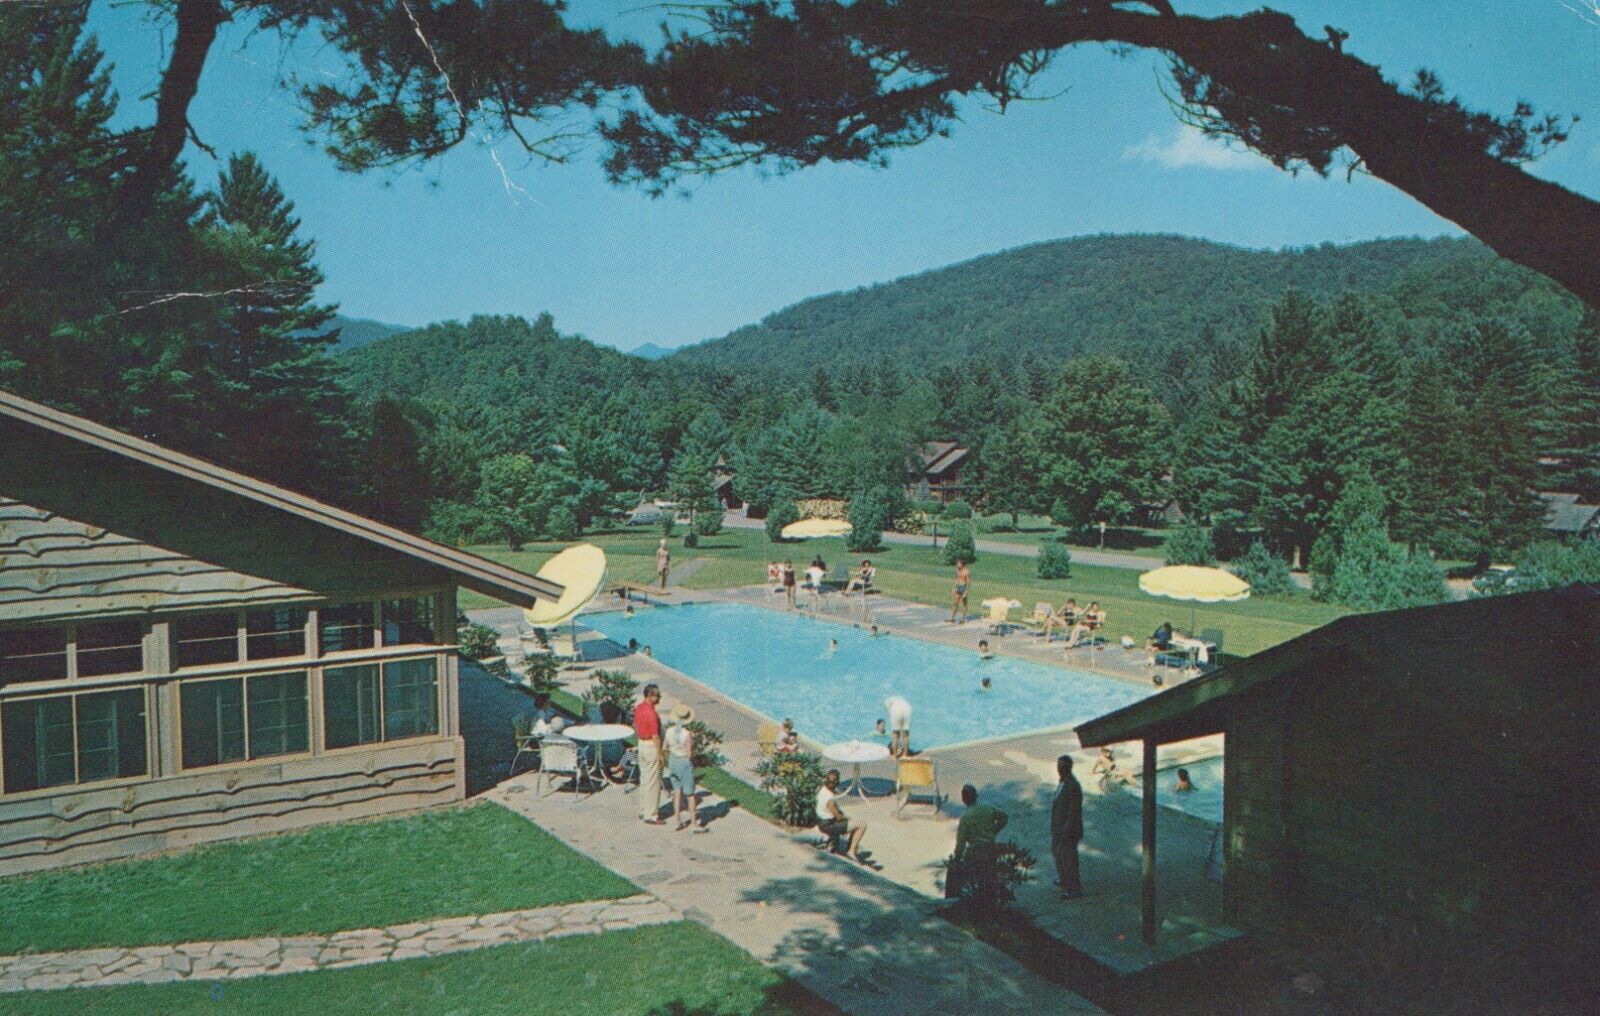 Swimming Pool And Rec Center Linville NC Posted Vintage Chrome Post Card